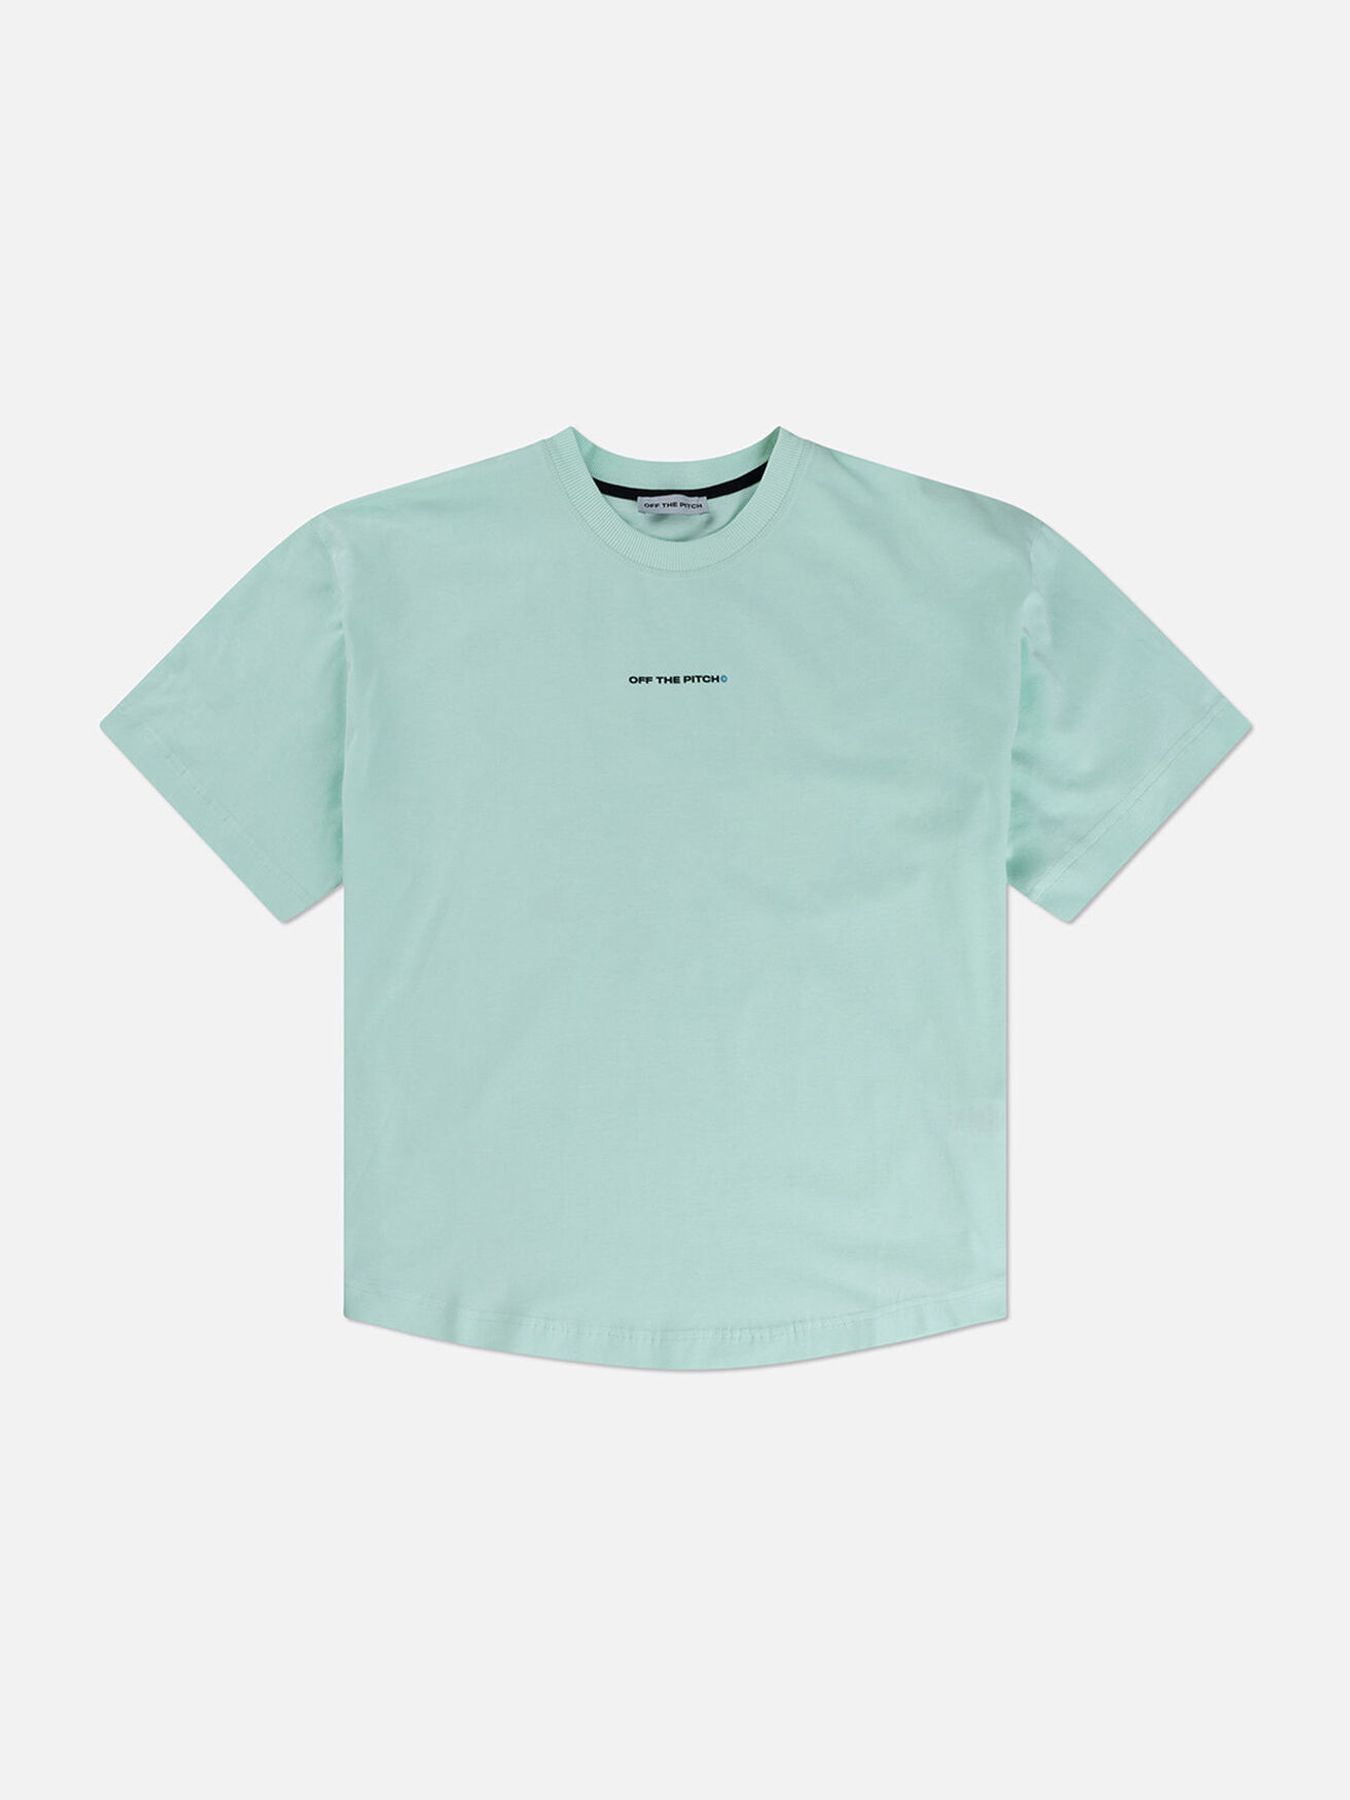 Off The Pitch New world tee Jade Mint 2900147018068